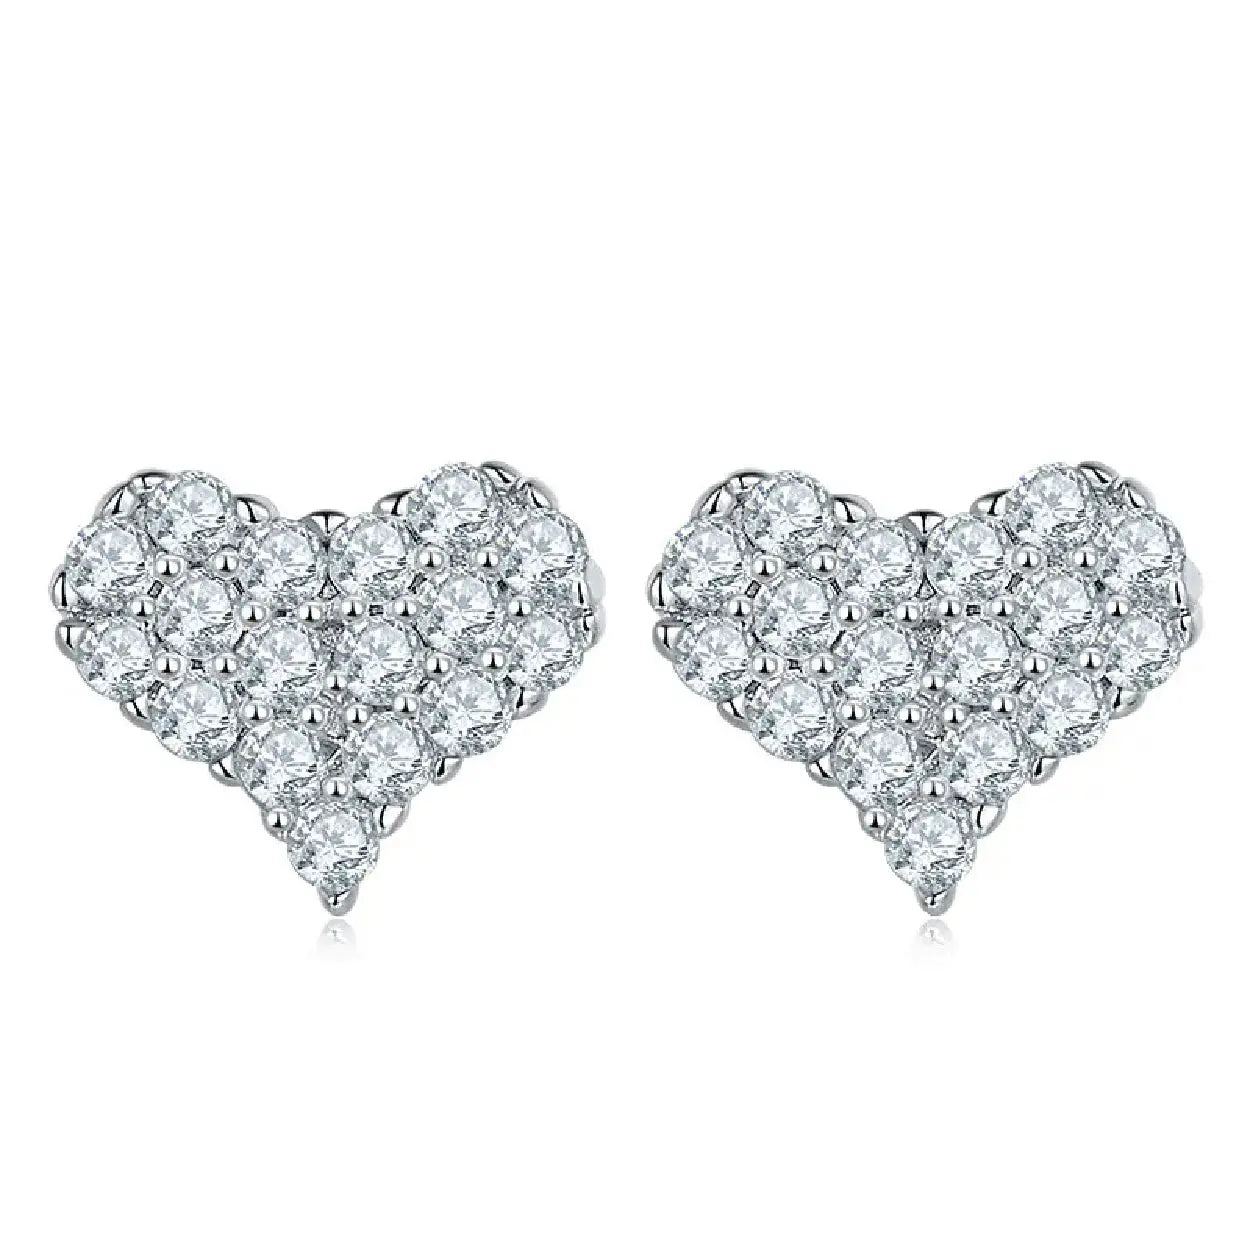 set of sterling silver earrings in heart shape with moissanite main stones